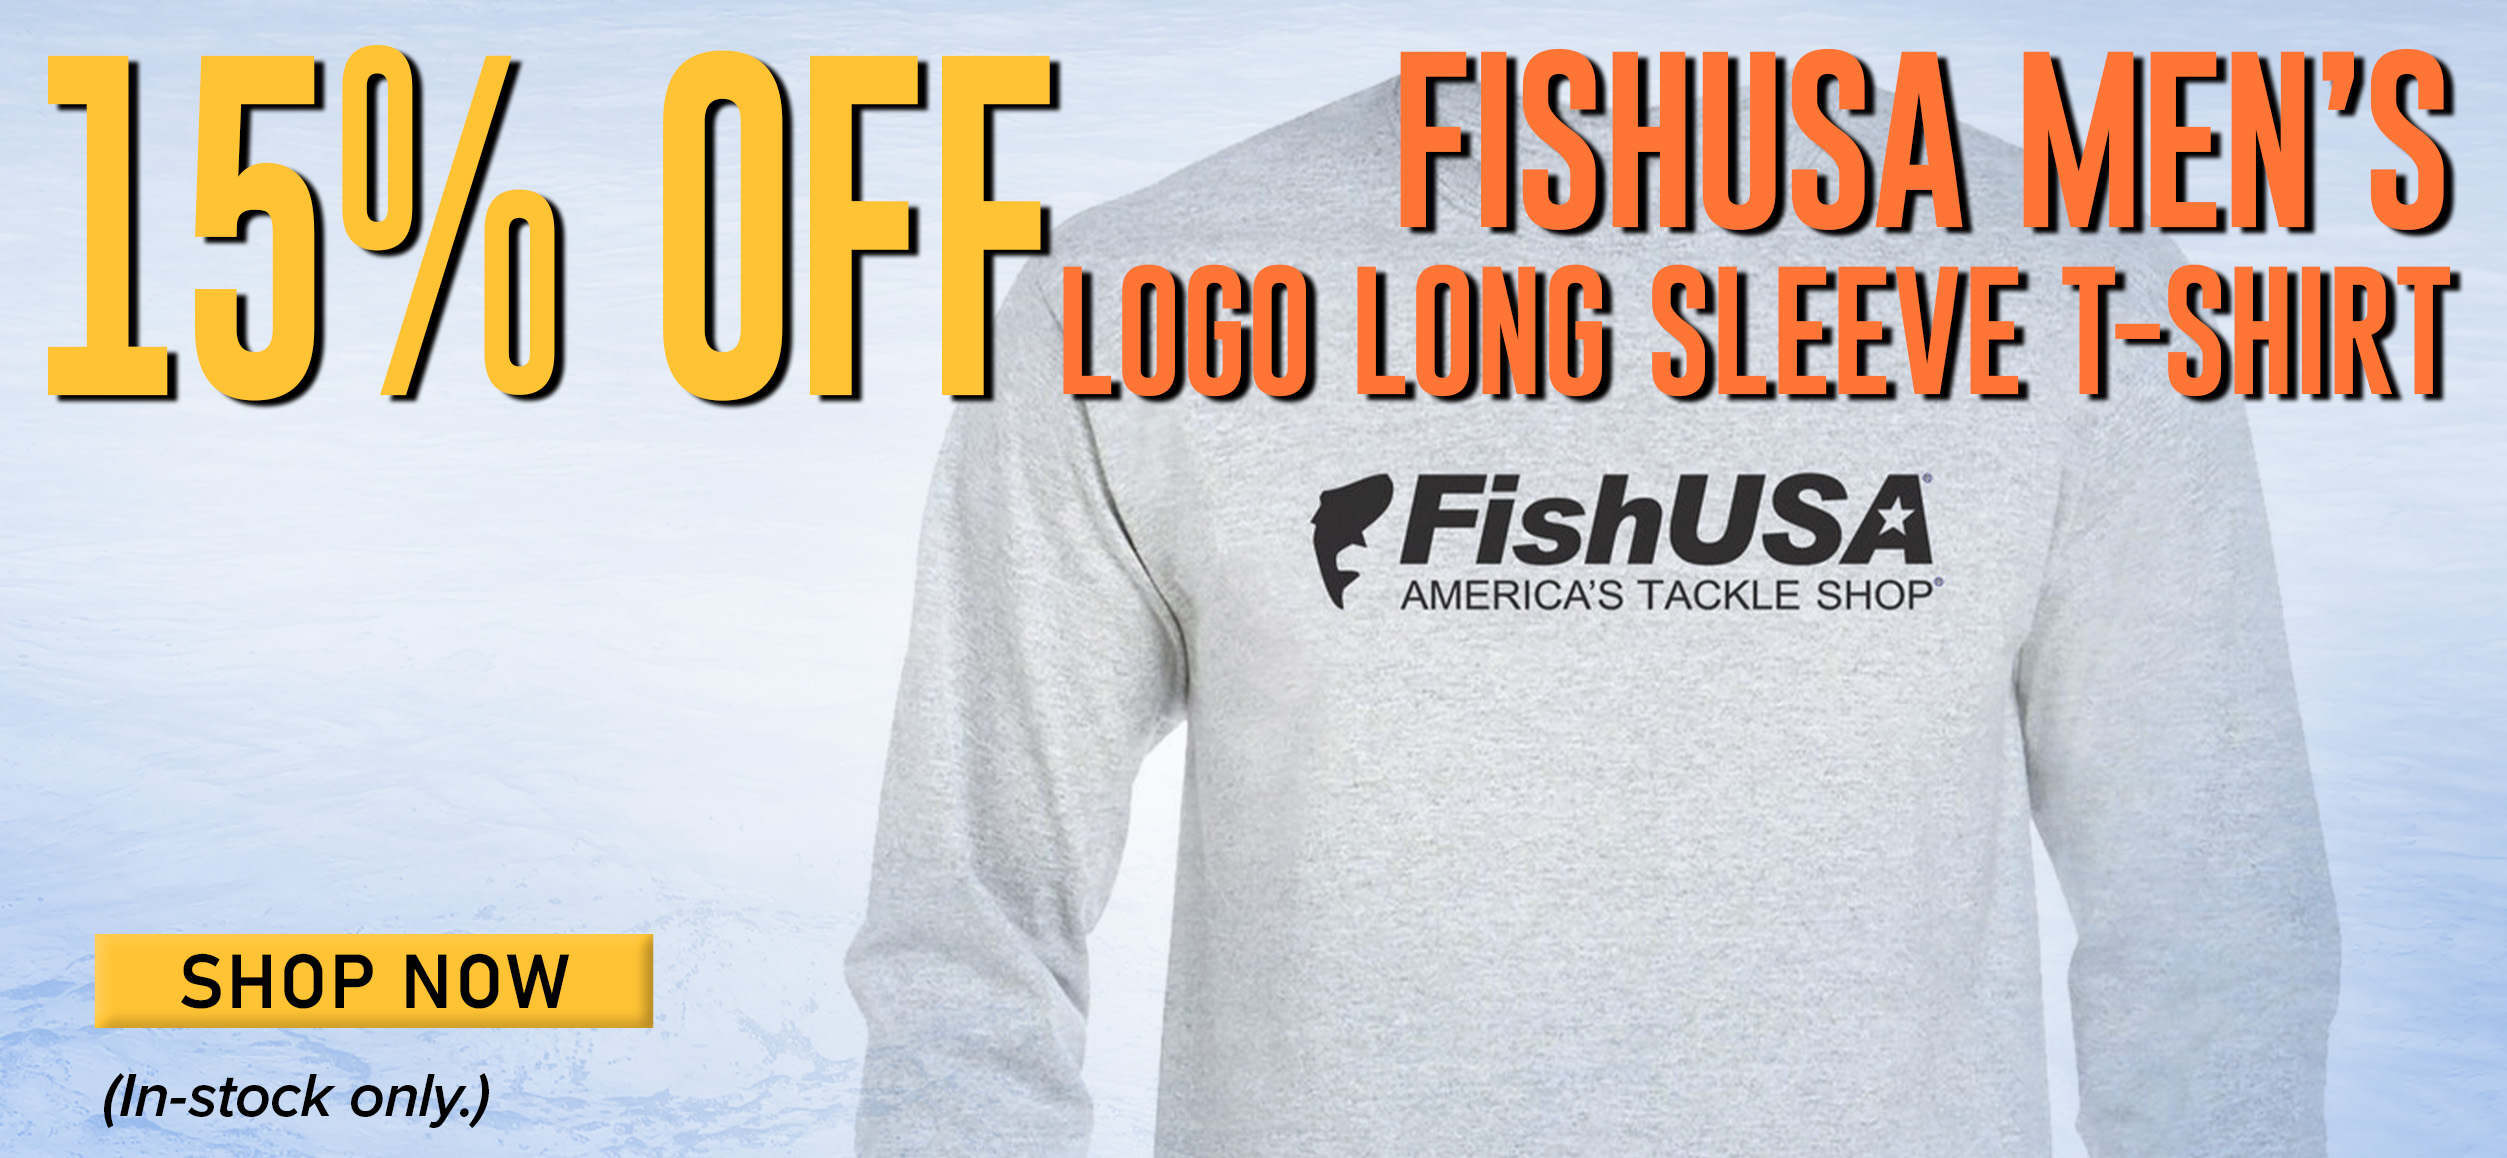 15% Off FishUSA Men's Logo Long Sleeve T-Shirt Shop Now (In-stock only.)